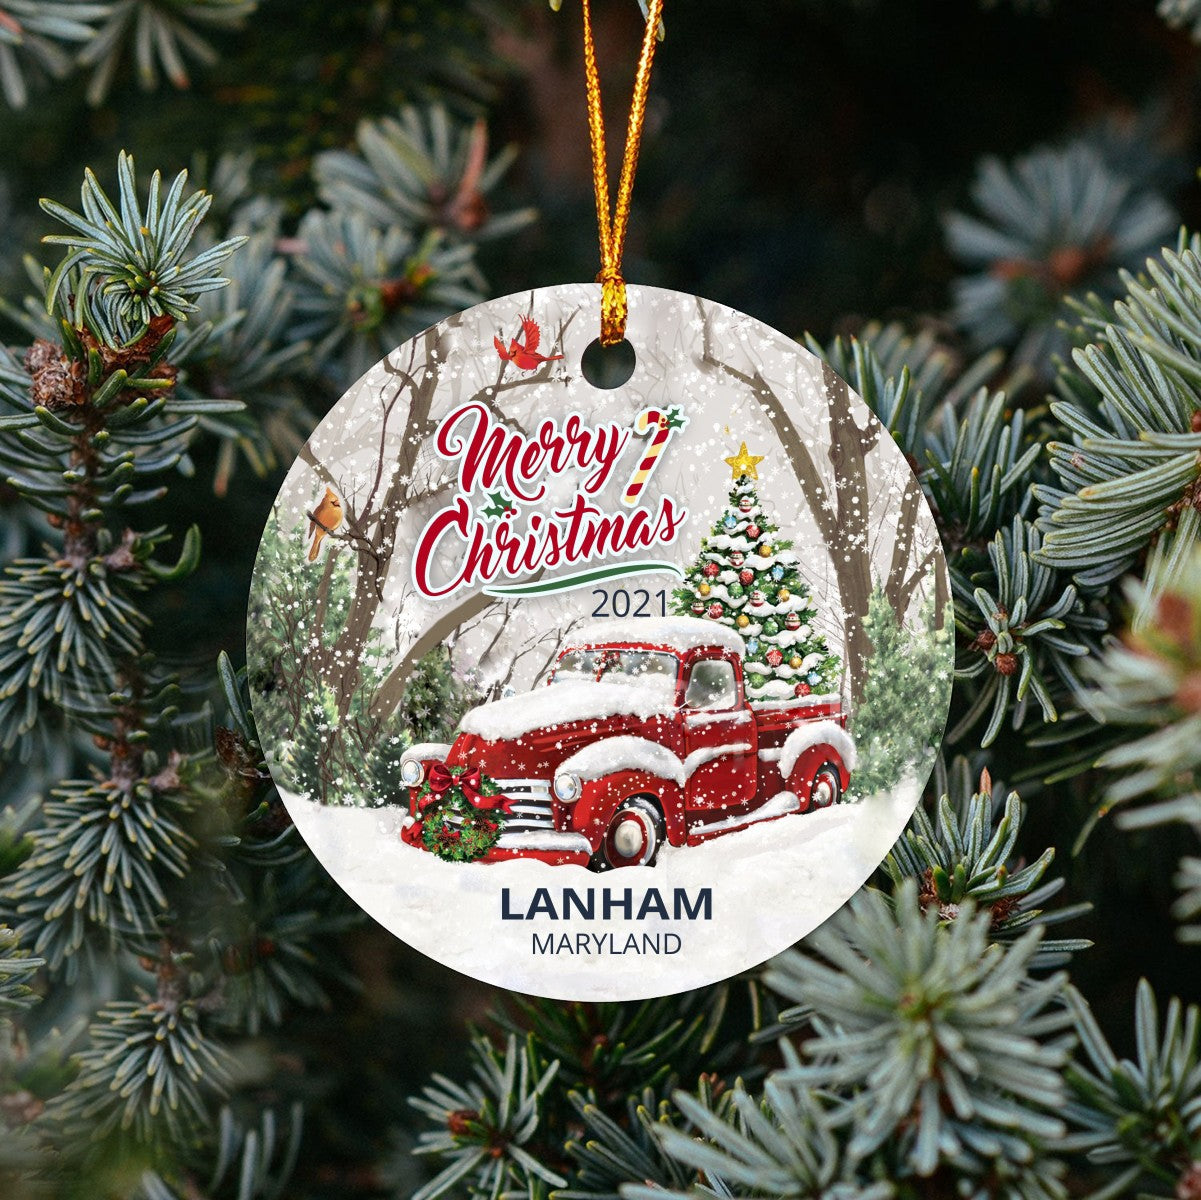 Christmas Tree Ornaments Lanham - Ornament With Name City, State Lanham Maryland MD Ornament - Red Truck Xmas Ornaments 3'' Plastic Gift For Family, Friend And Housewarming